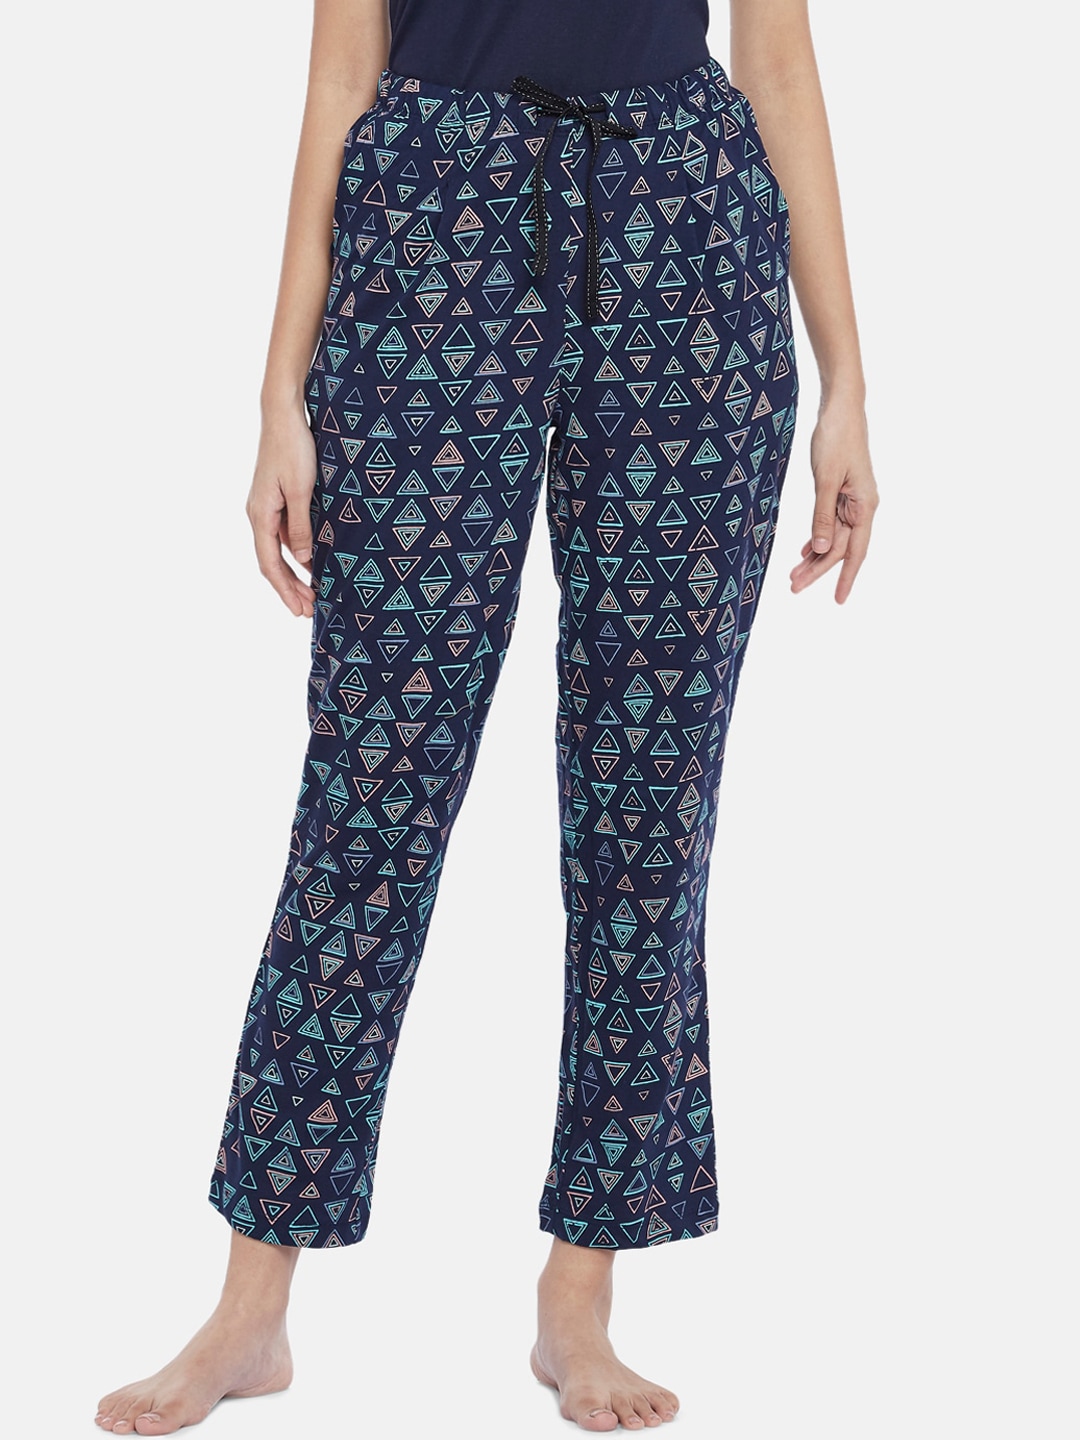 Dreamz by Pantaloons Women Navy Blue & Peach-Coloured Geometric Print Cotton Lounge Pants Price in India